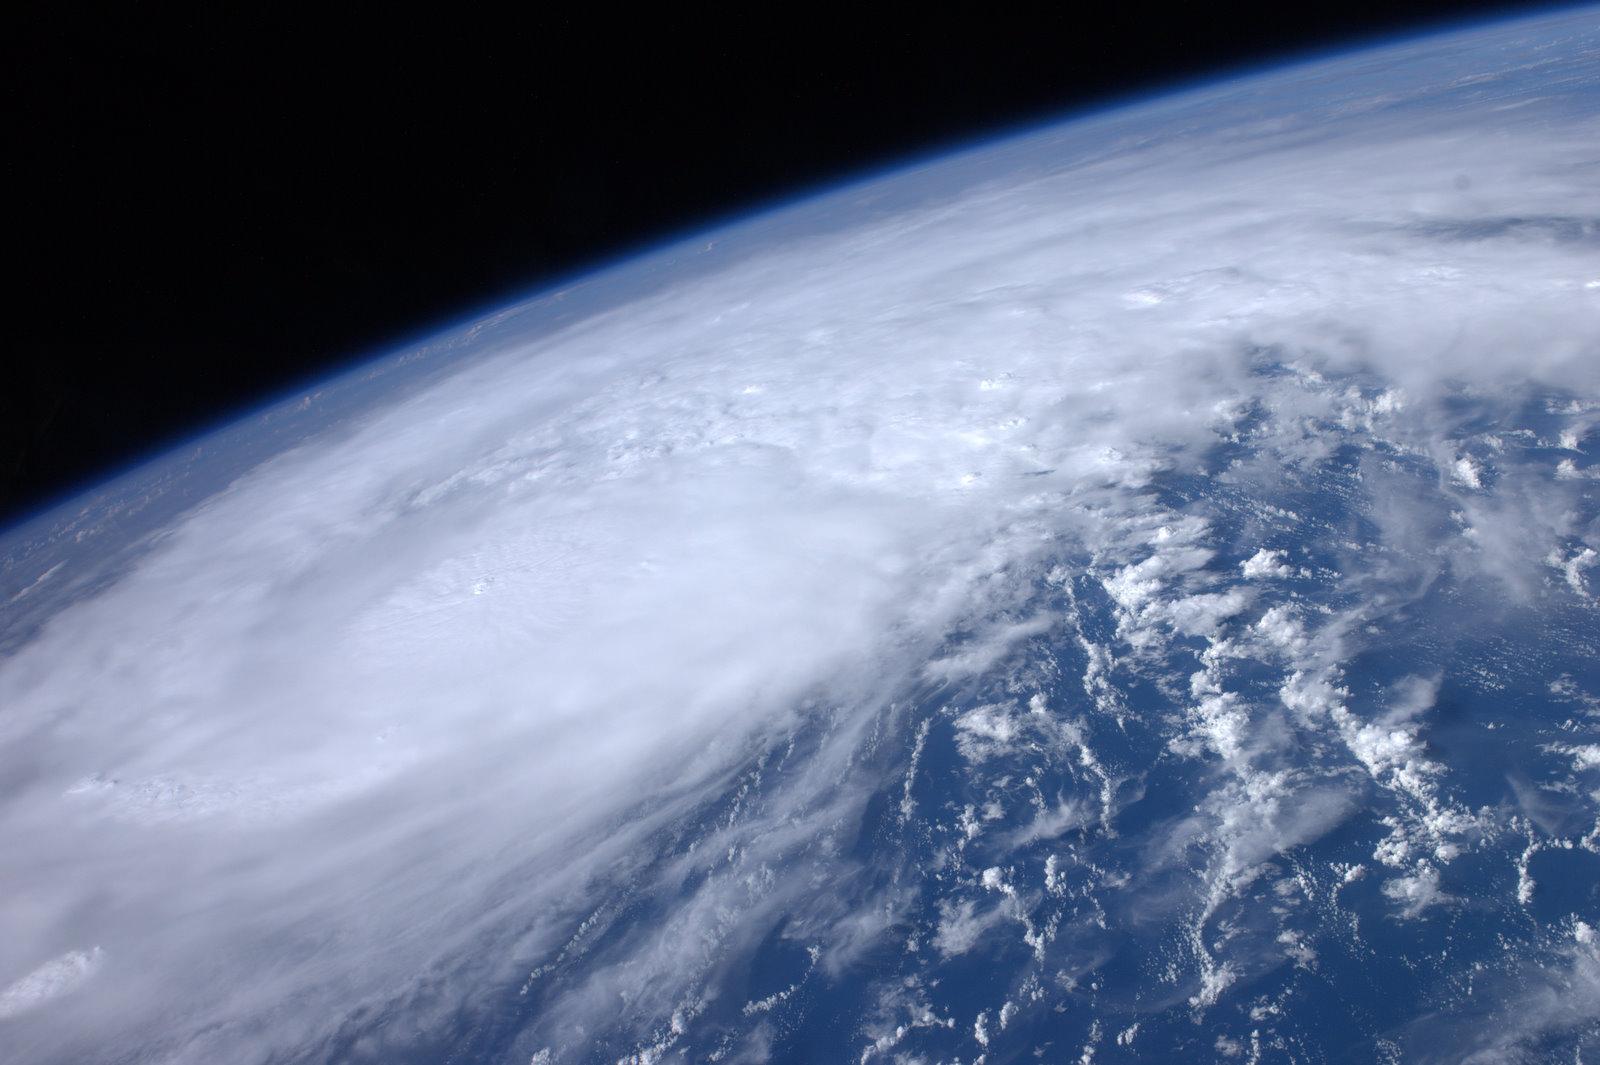 A photo of Hurricane Irene taken from space.